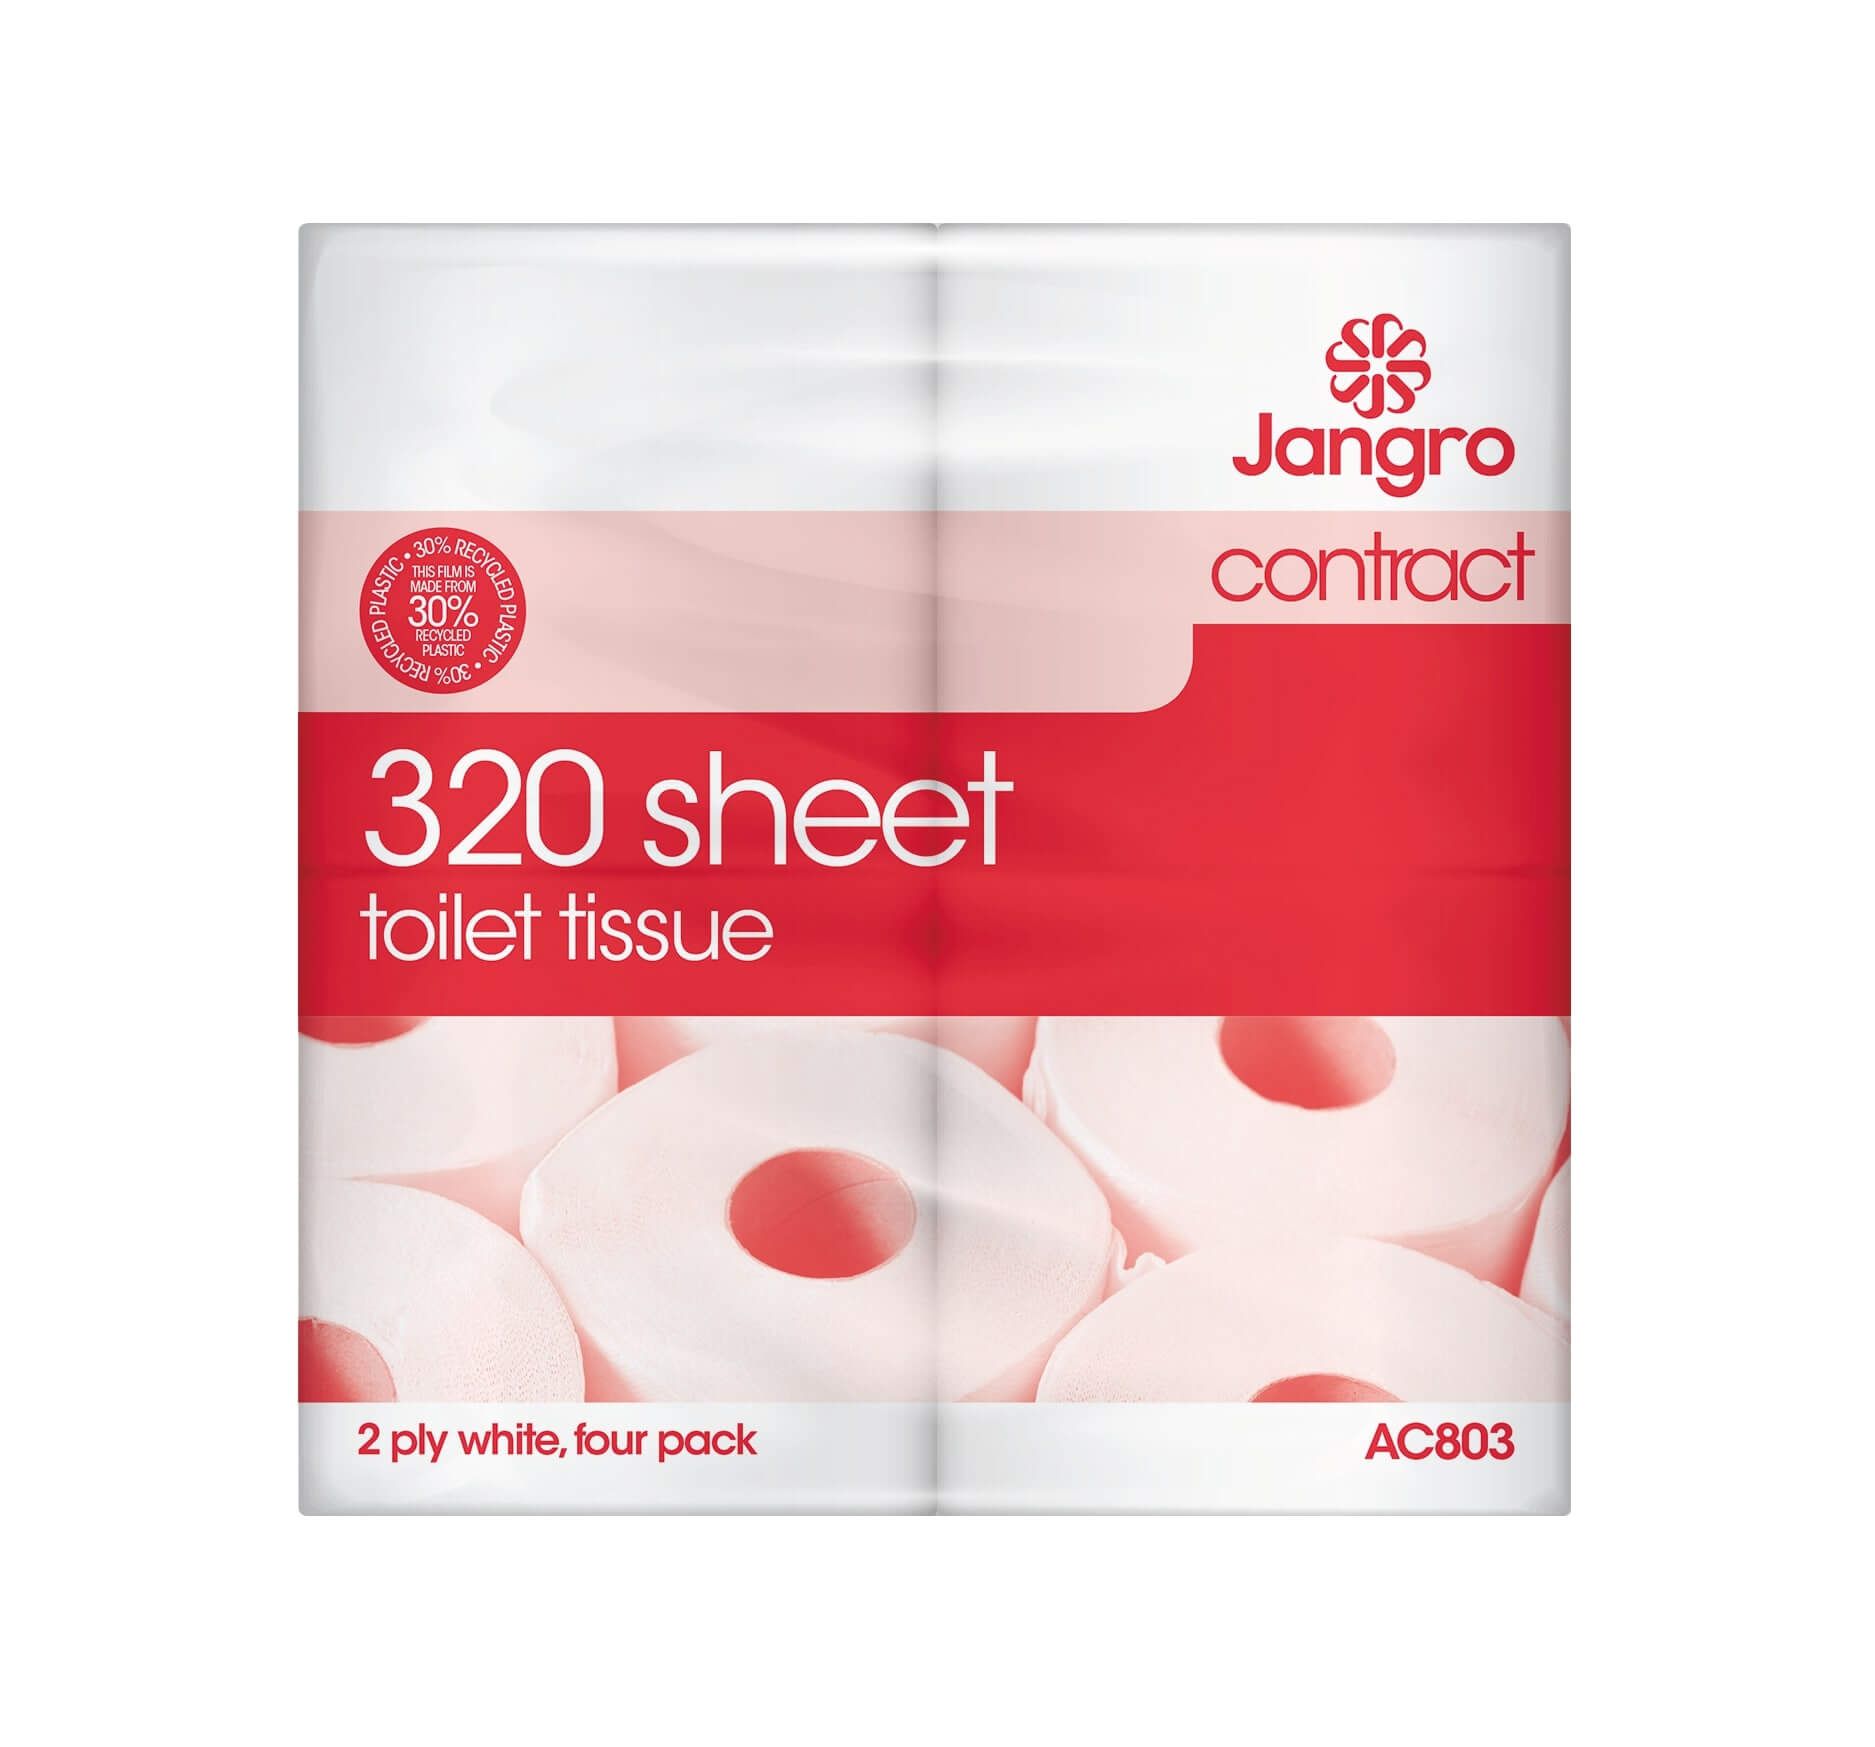 Contract 320 Sheet Toilet Roll 9 x 4 pack, 2 ply